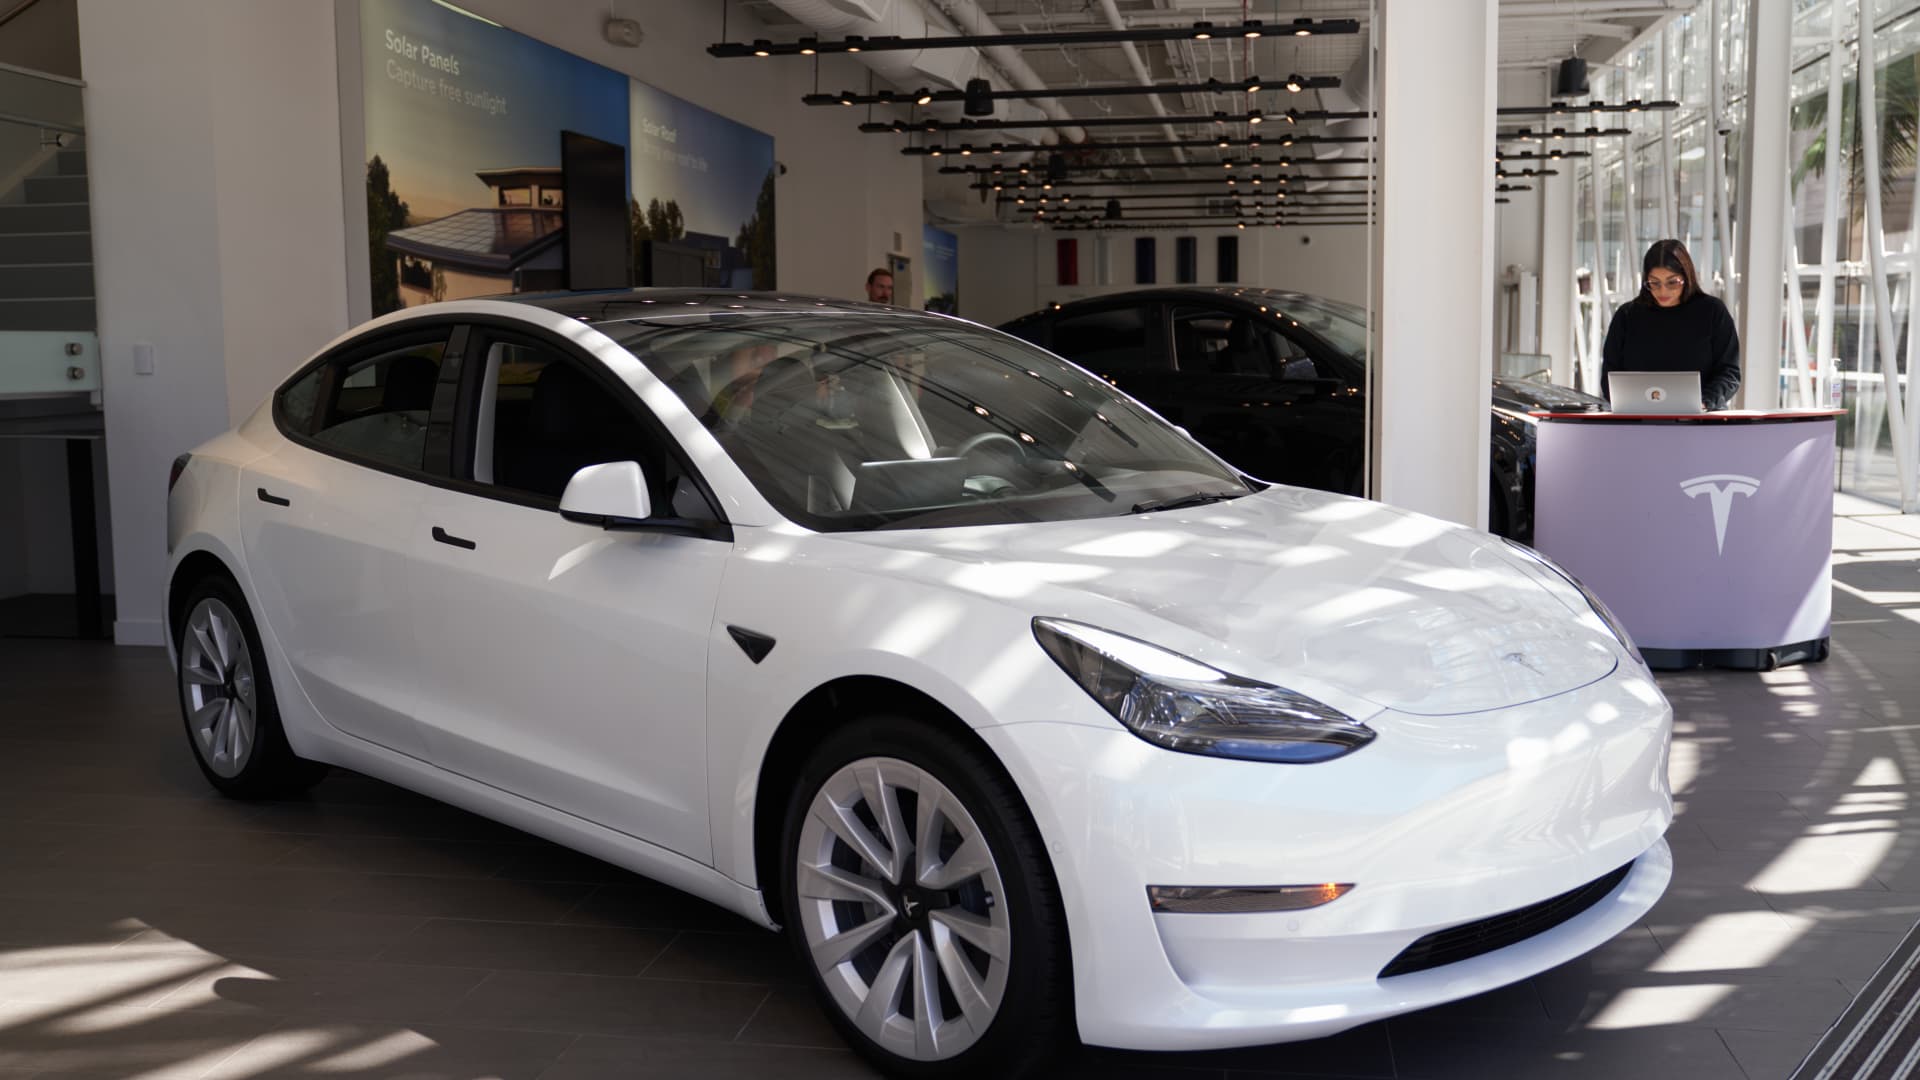 Tesla still dominant, but its US market share is eroding as cheaper EVs arrive